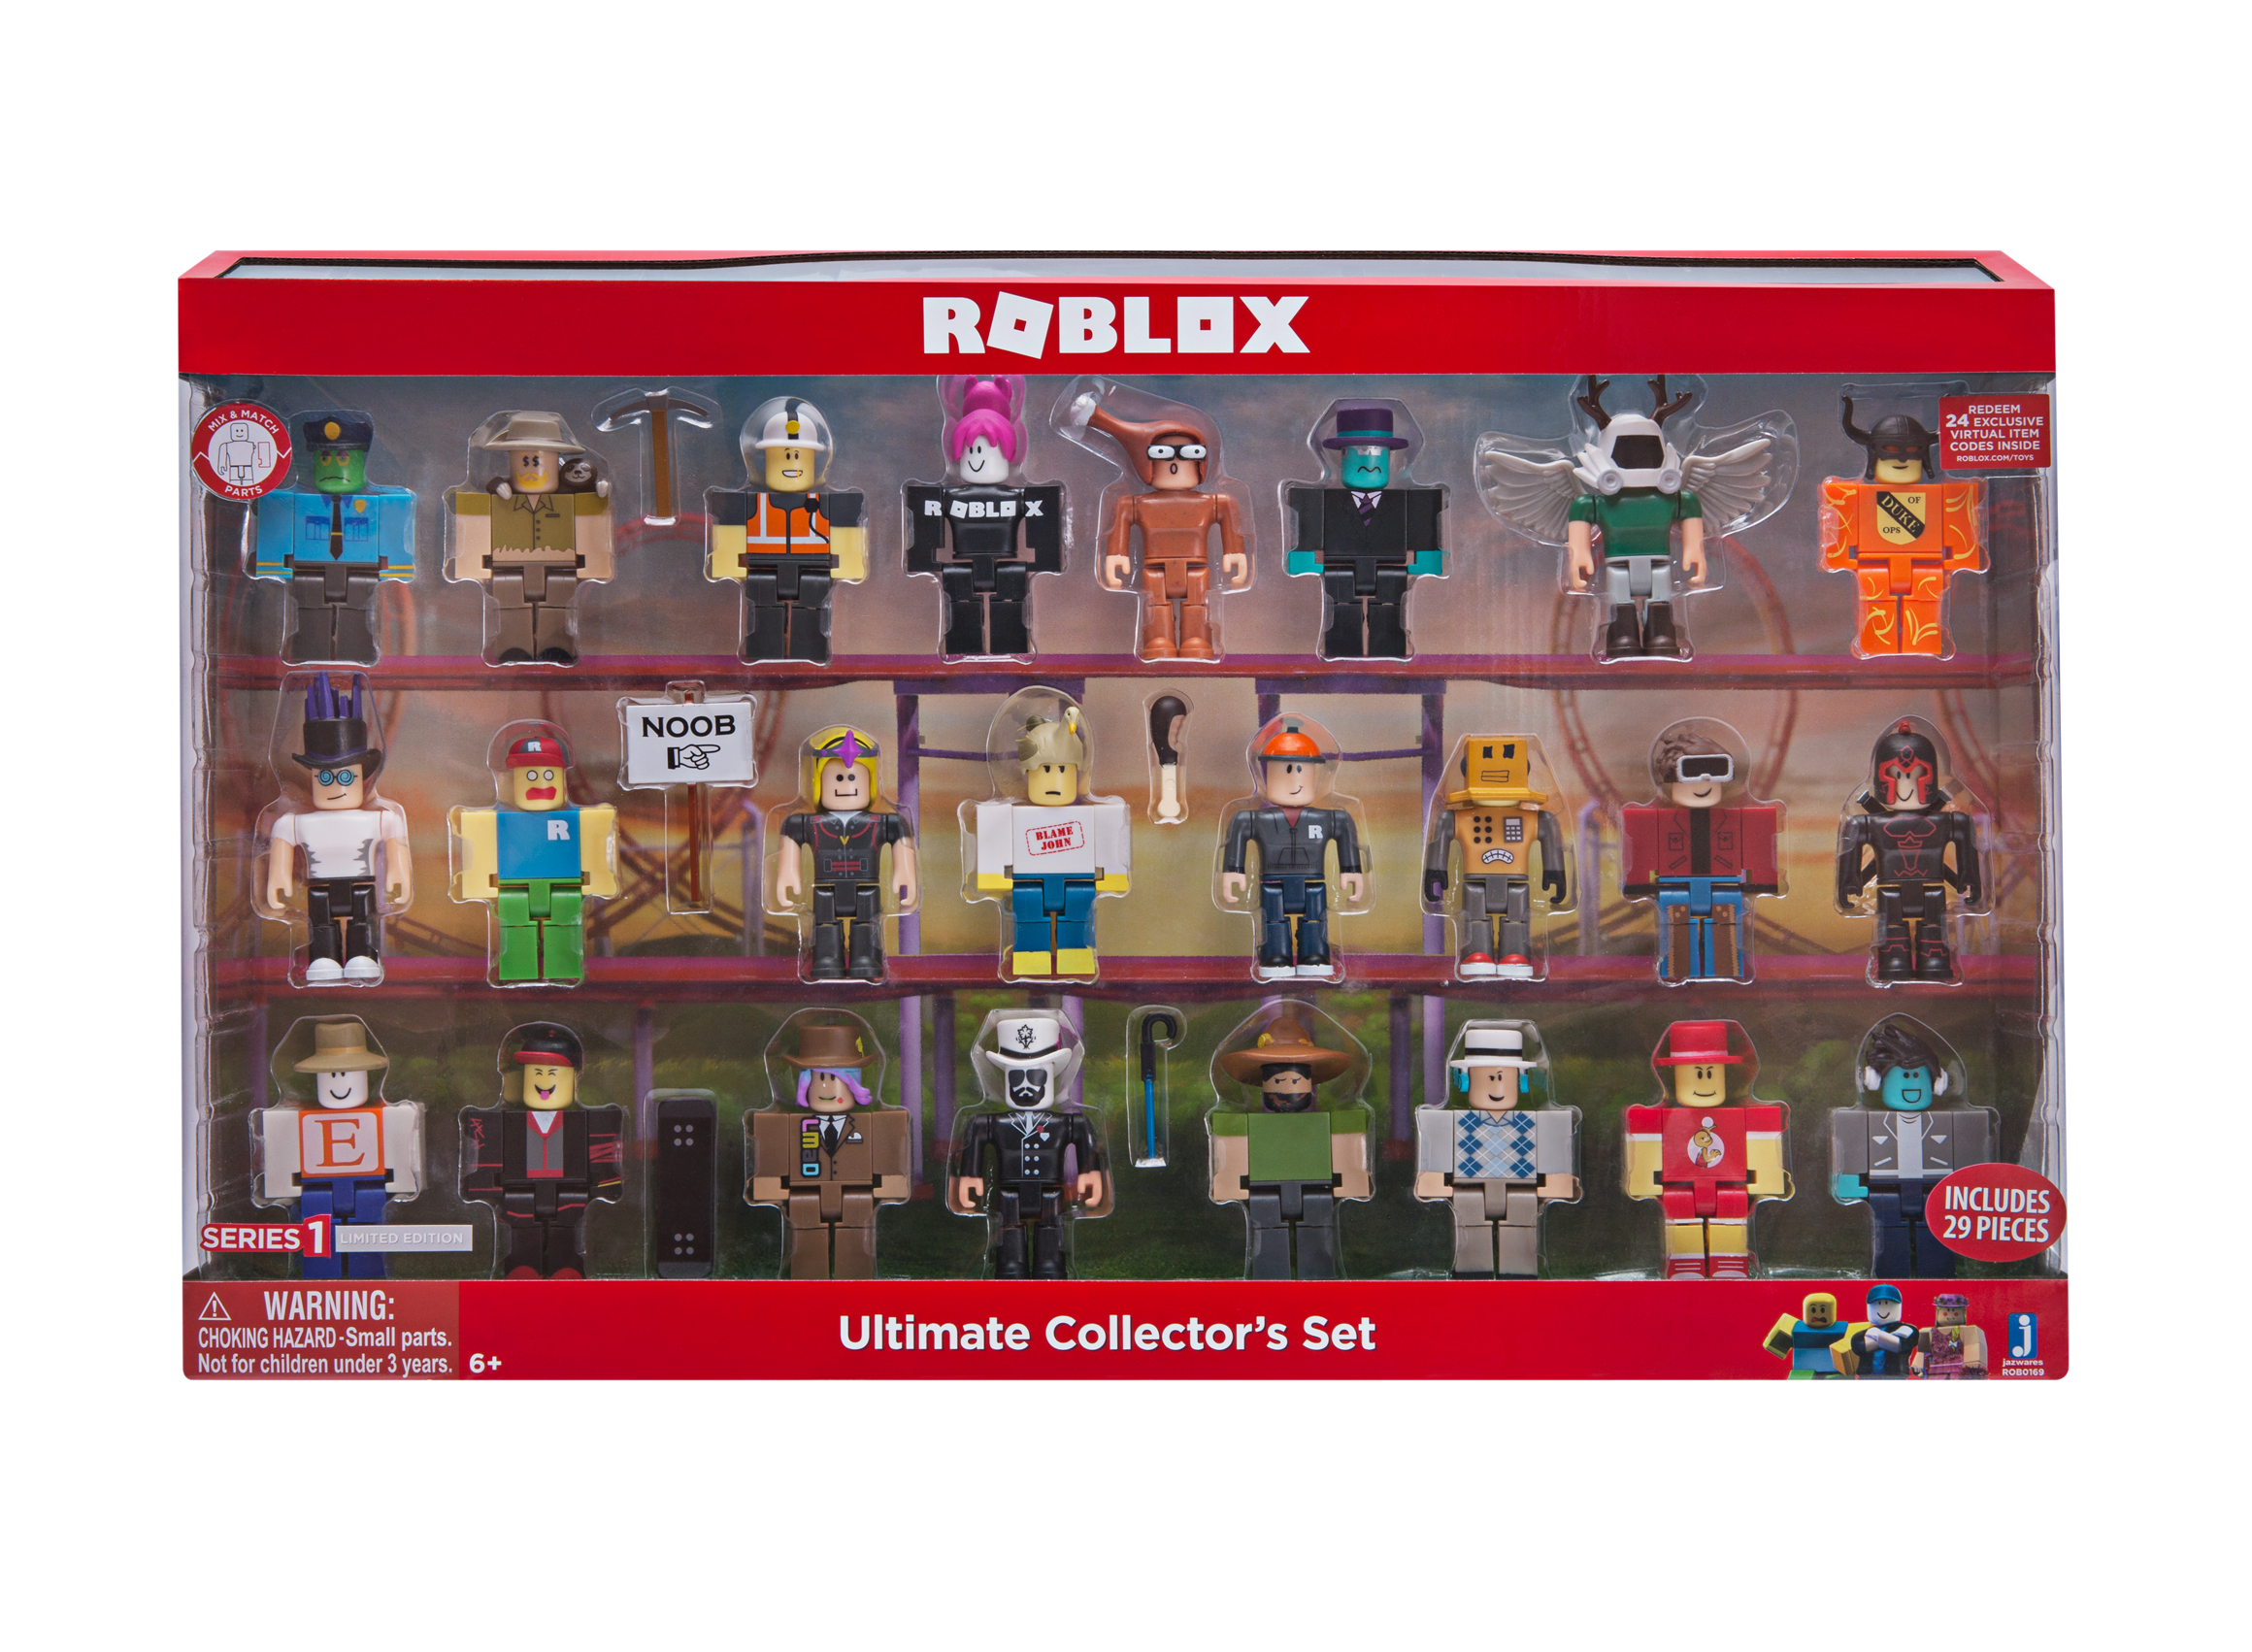 Playsets Action Toy Figures Roblox Ultimate Collectors Set Series 2 Playsets Vehicles Playsets - roblox roblox series 2 pyrolysis action figure mystery box